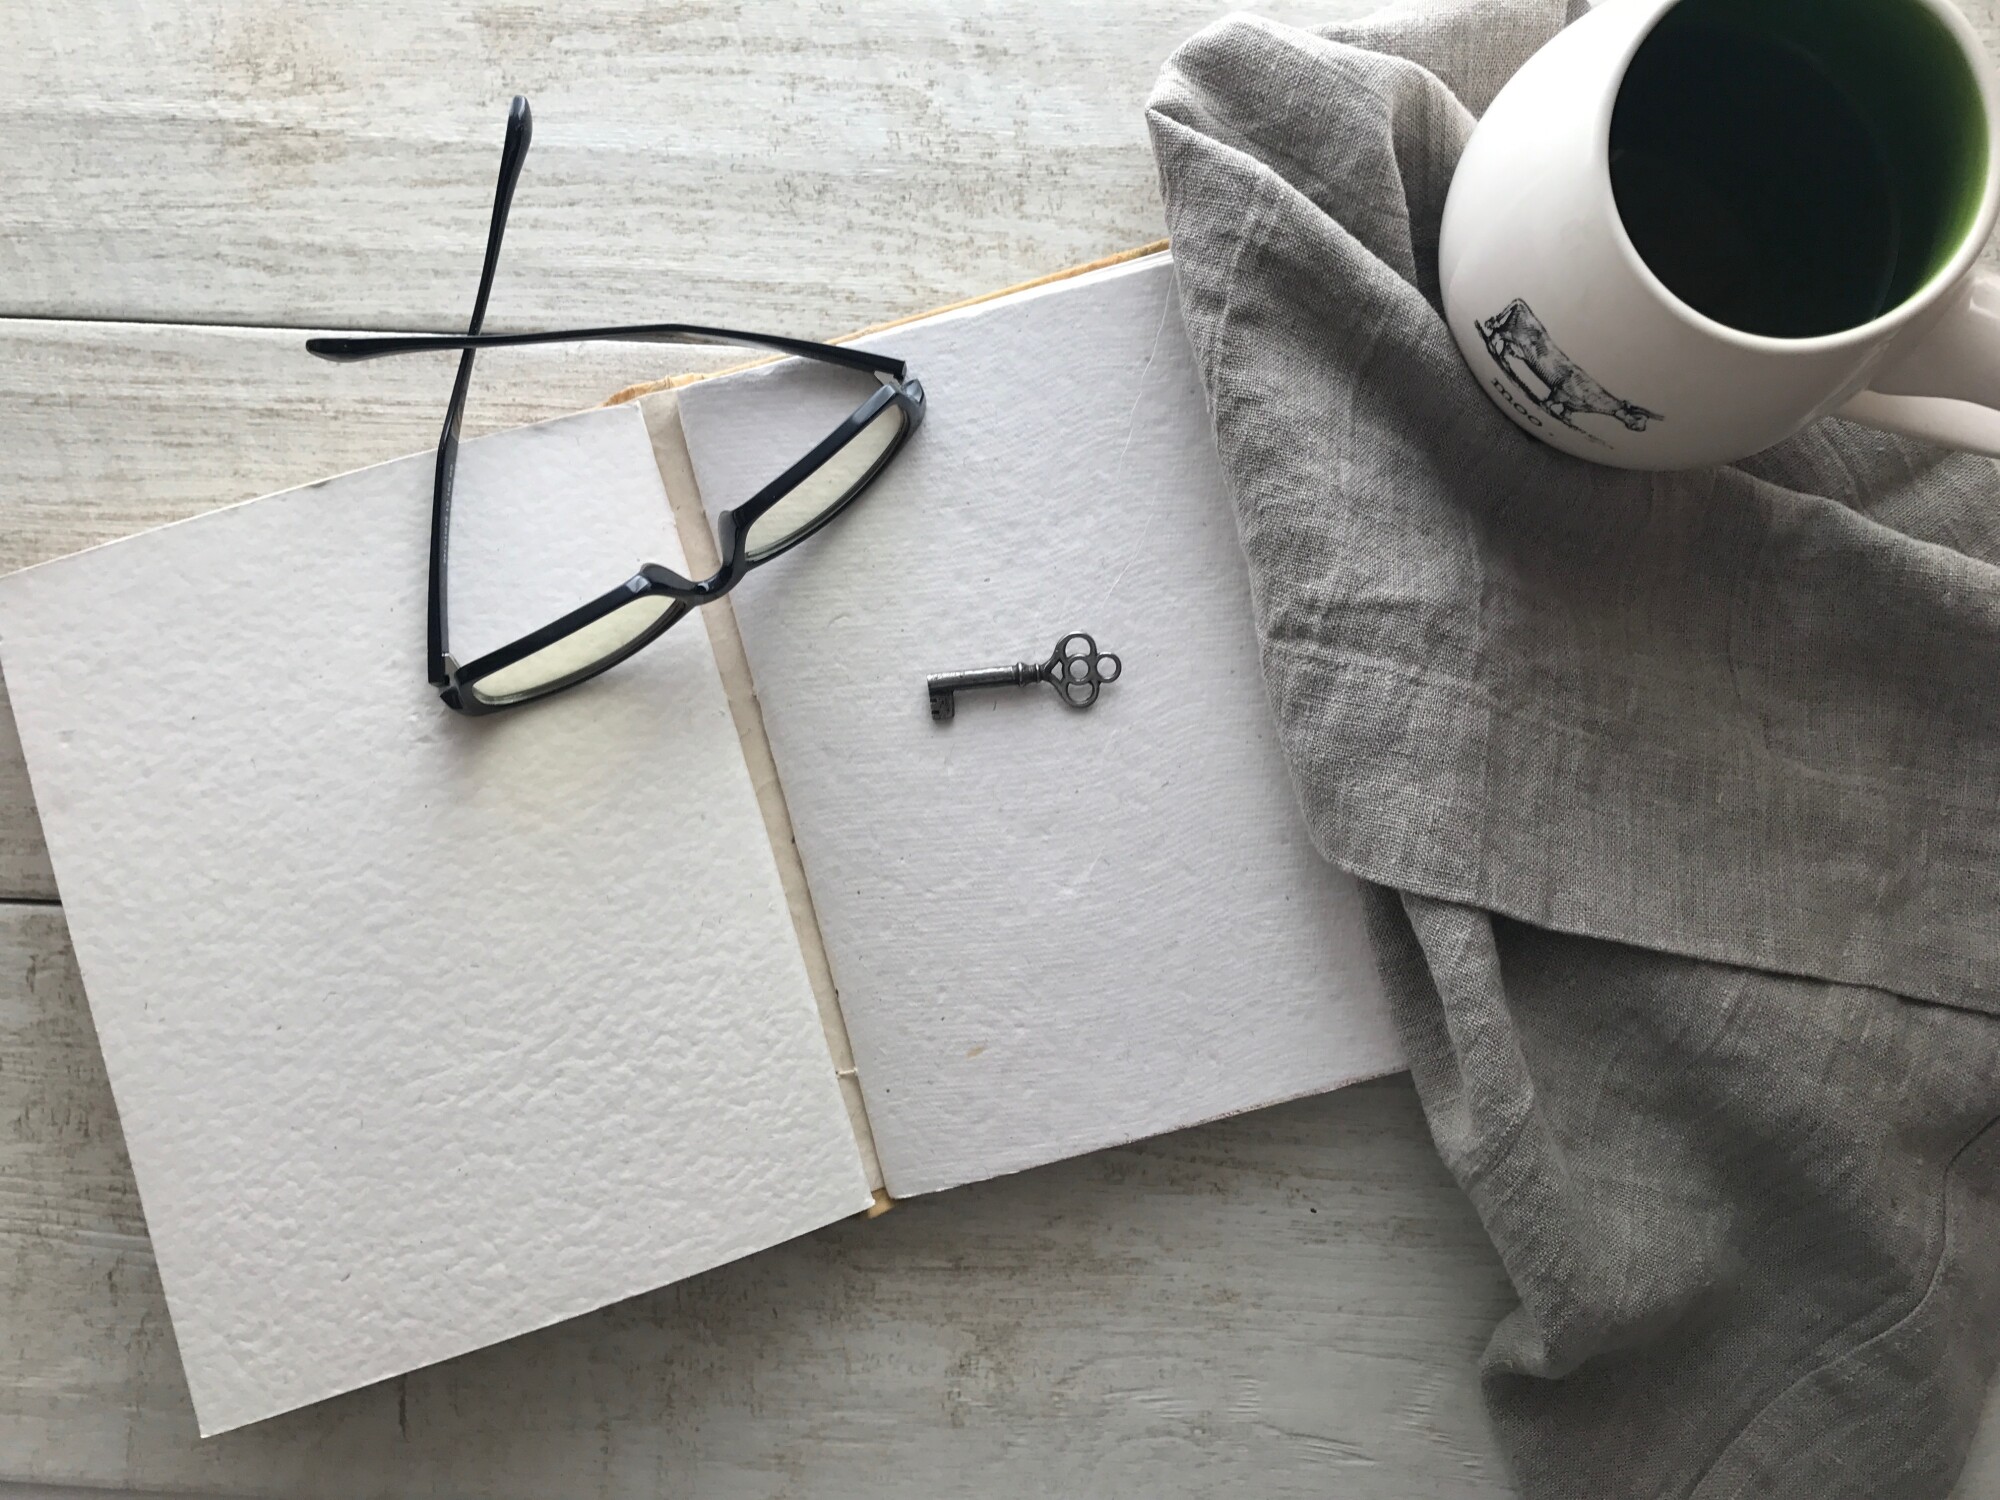 Eyeglasses on top of a blank page of a book with a key and cup of tea beside it